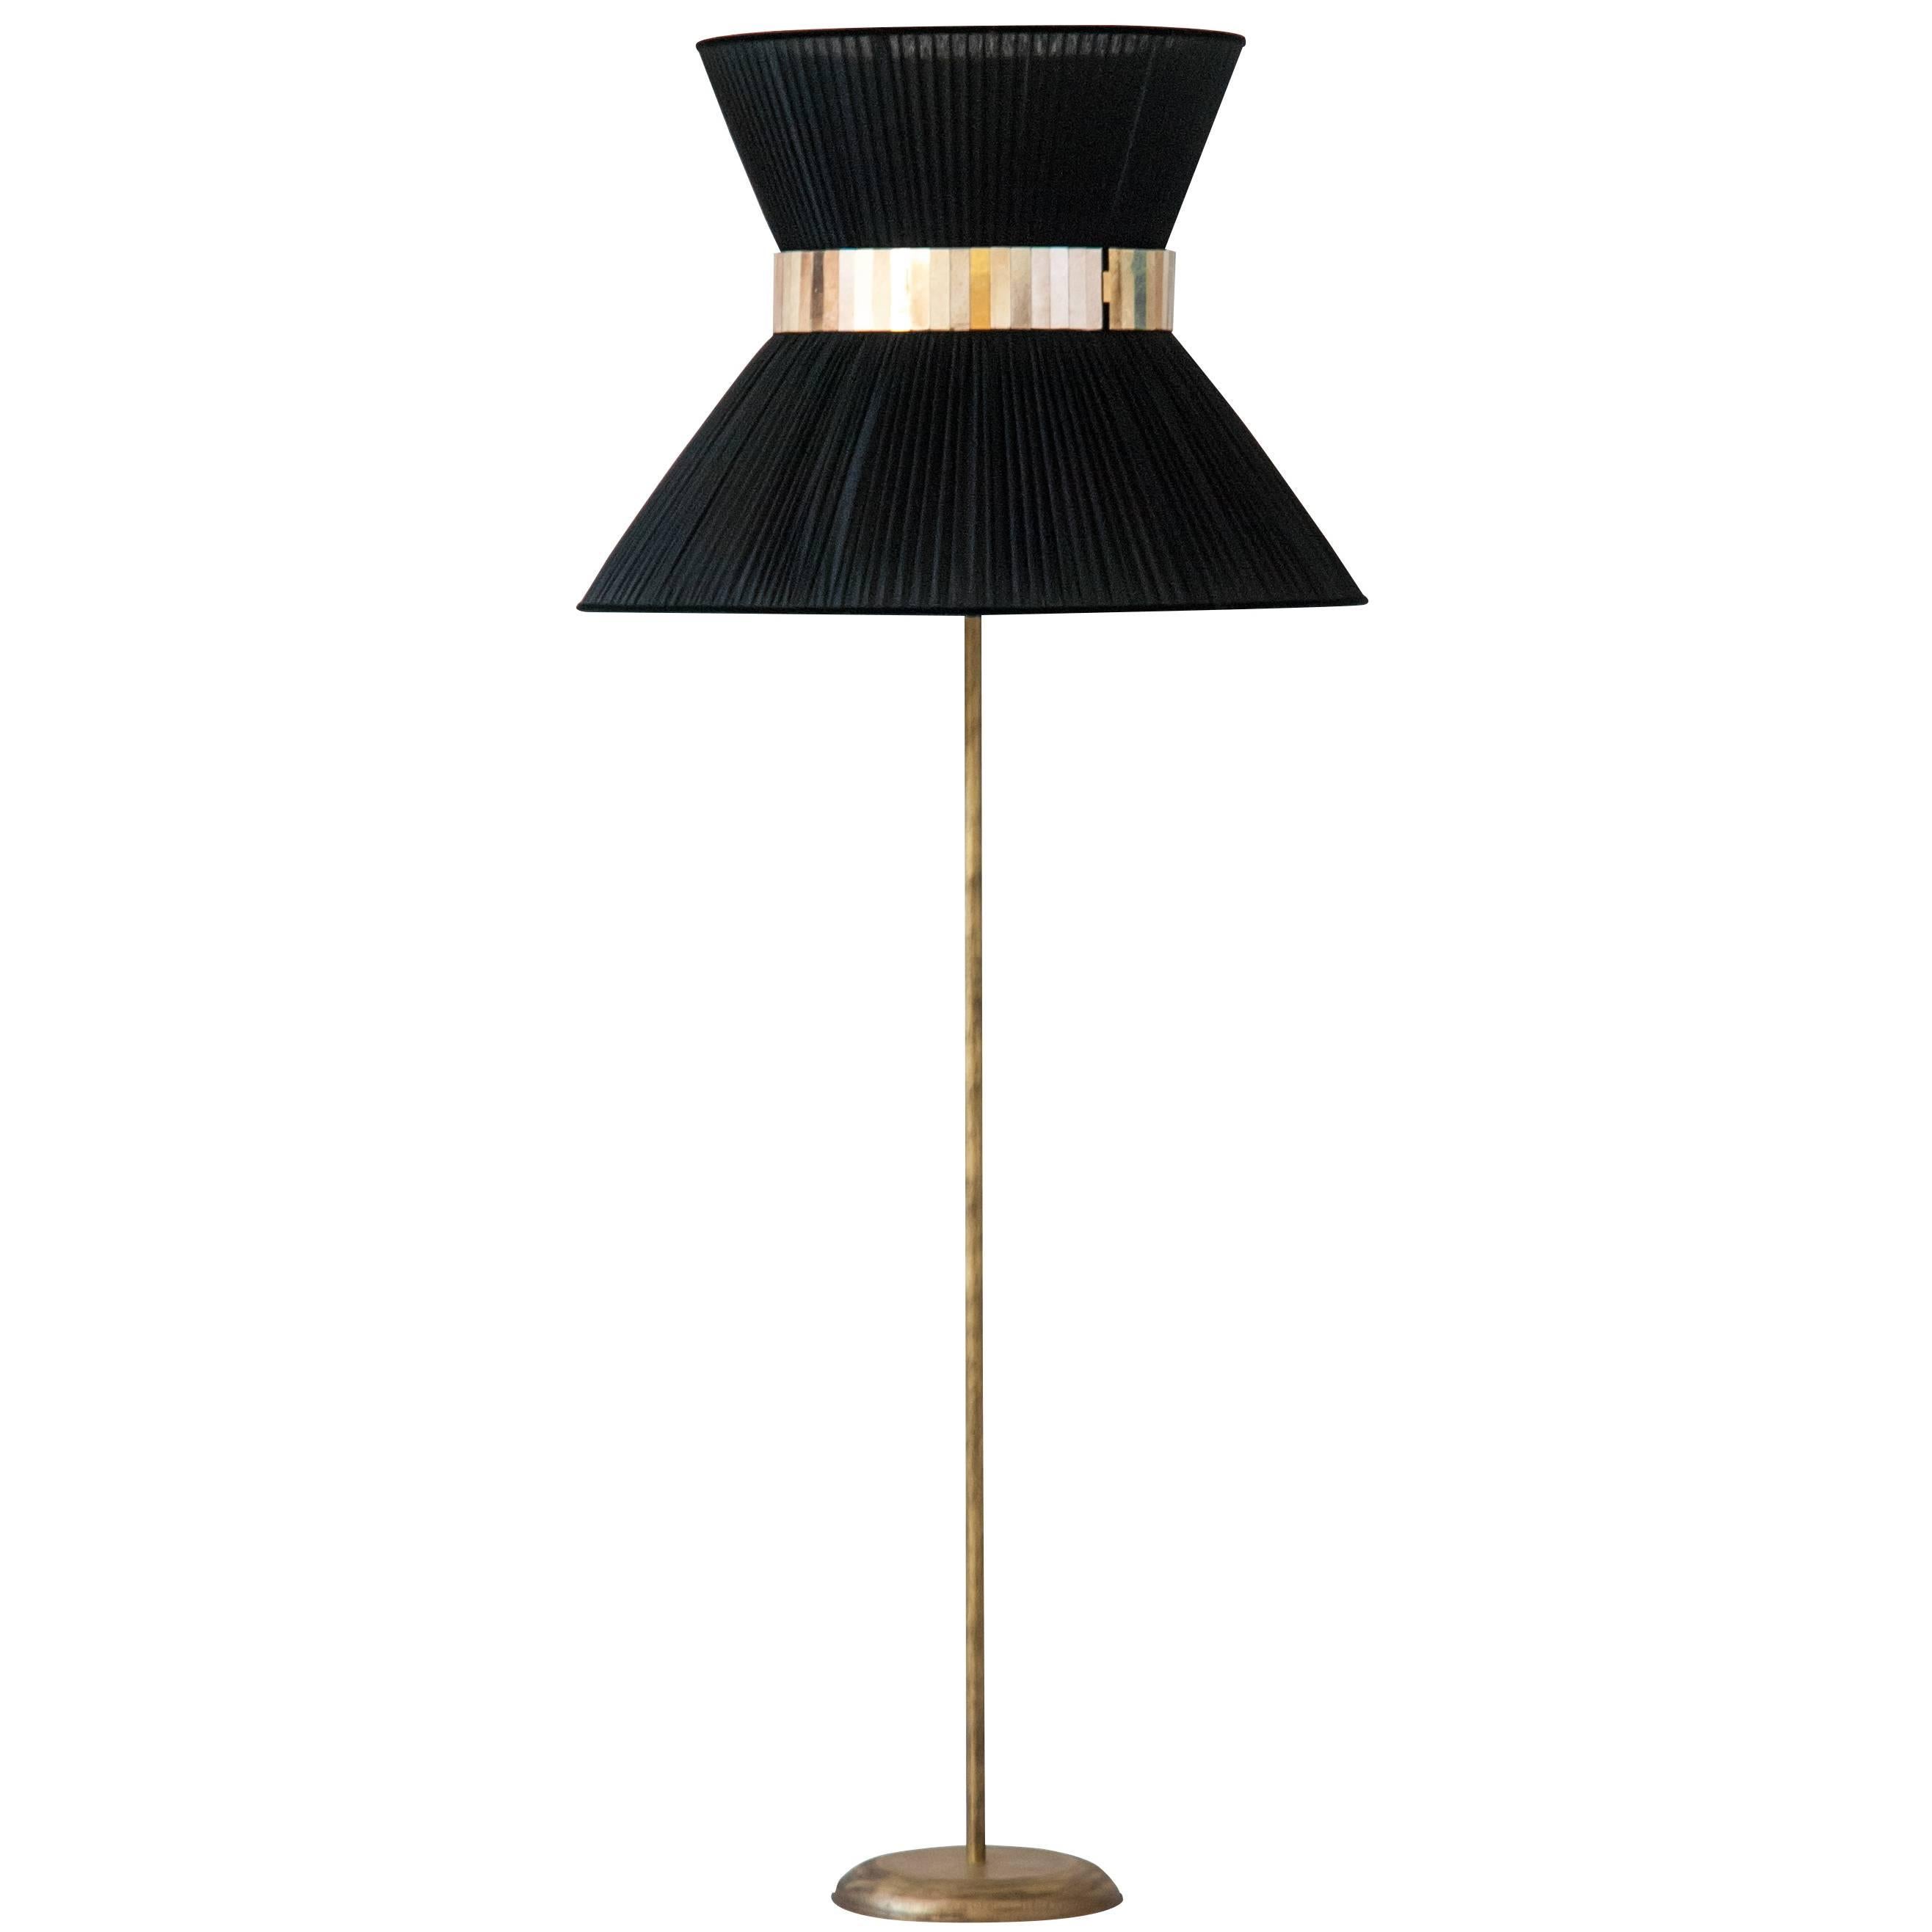  Tiffany contemporary Floor Lamp black Silk, Antiqued Brass, Silvered Glass     